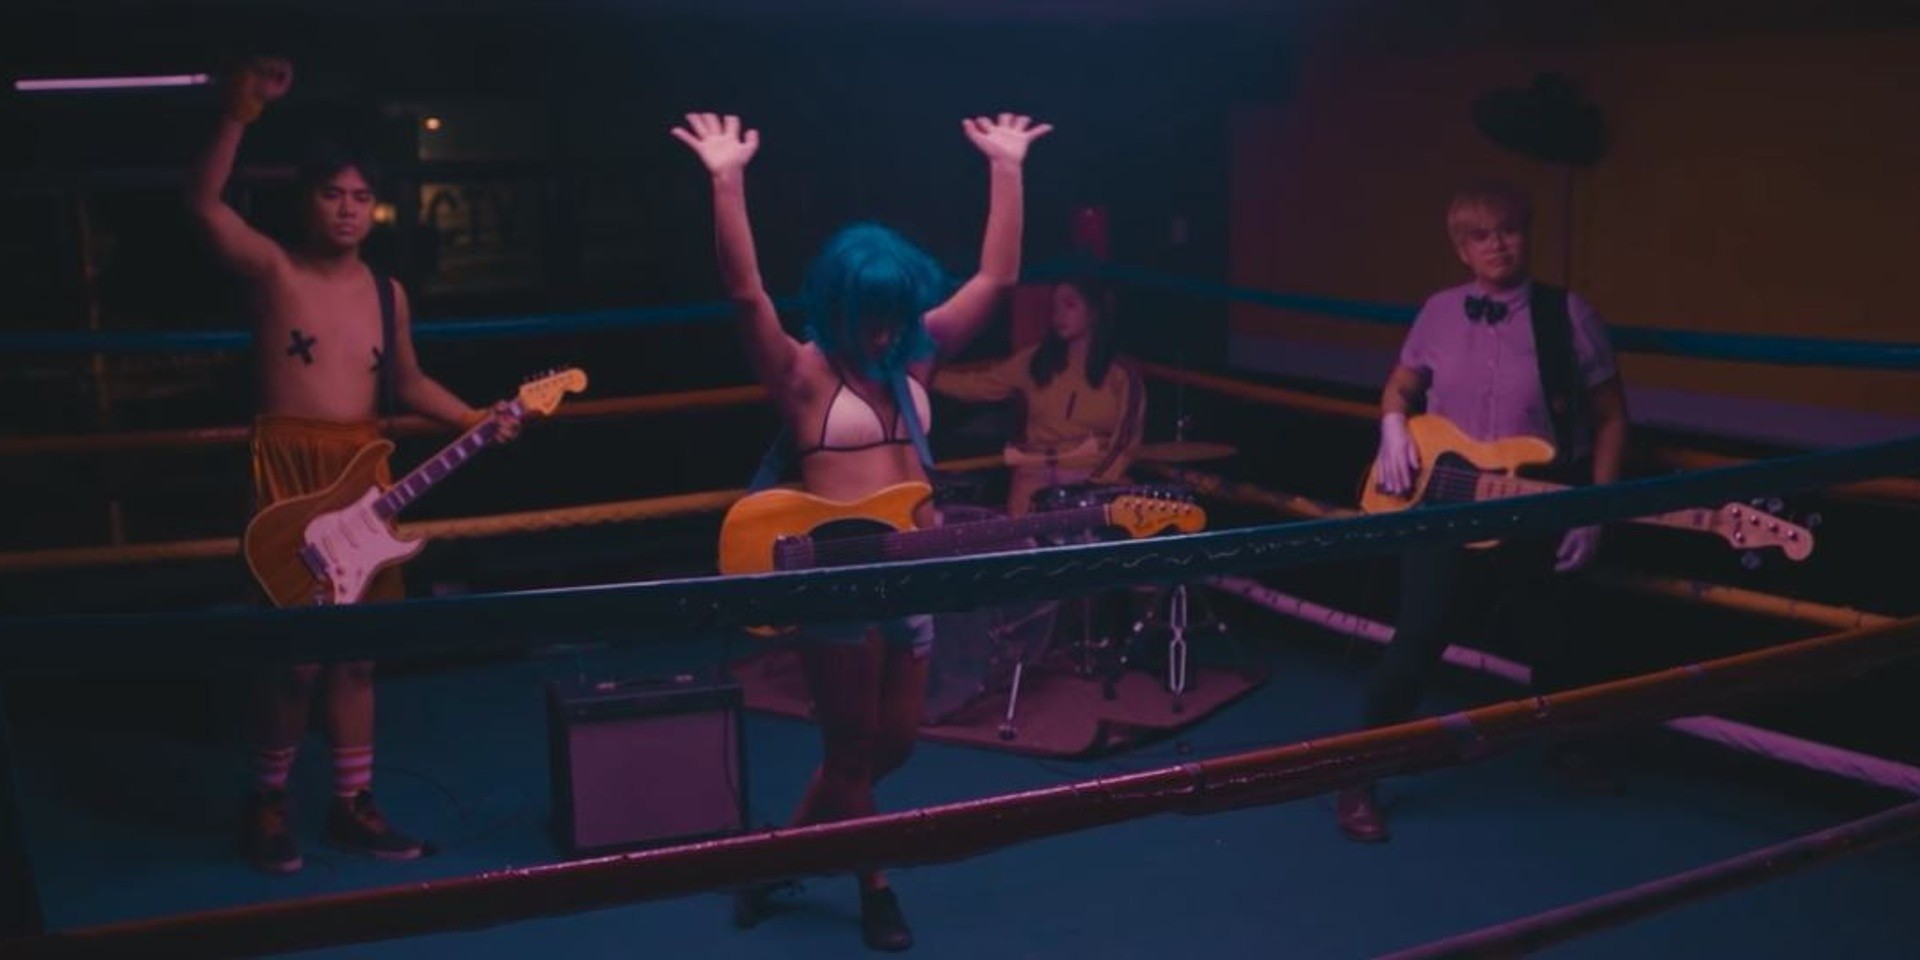 Oh, Flamingo! reveal 'Bottom of This' video – watch